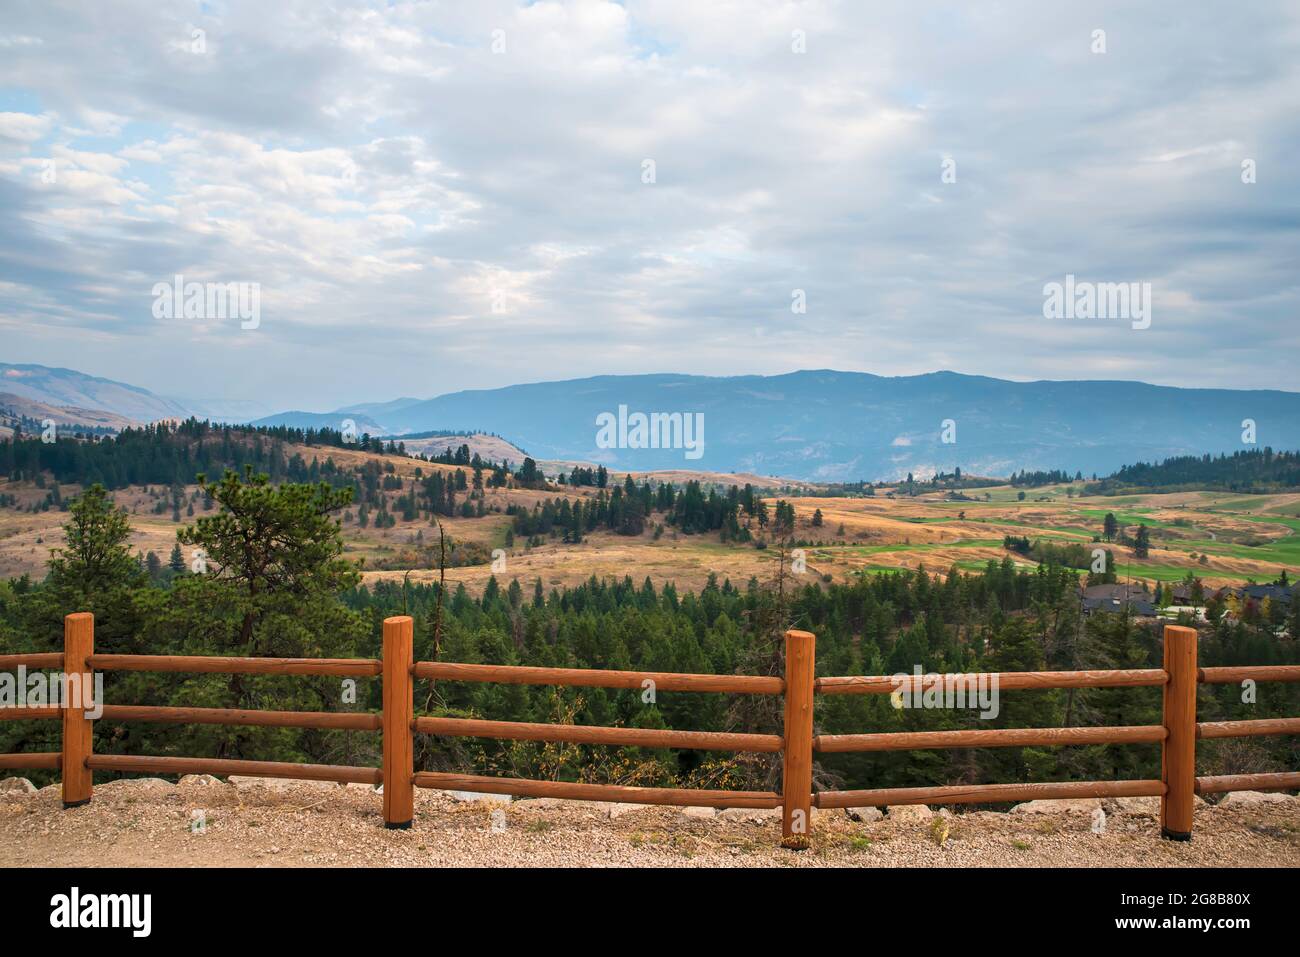 Hilly landscape behind a log hedge with mountains and forest, cloudy sky in the background Stock Photo